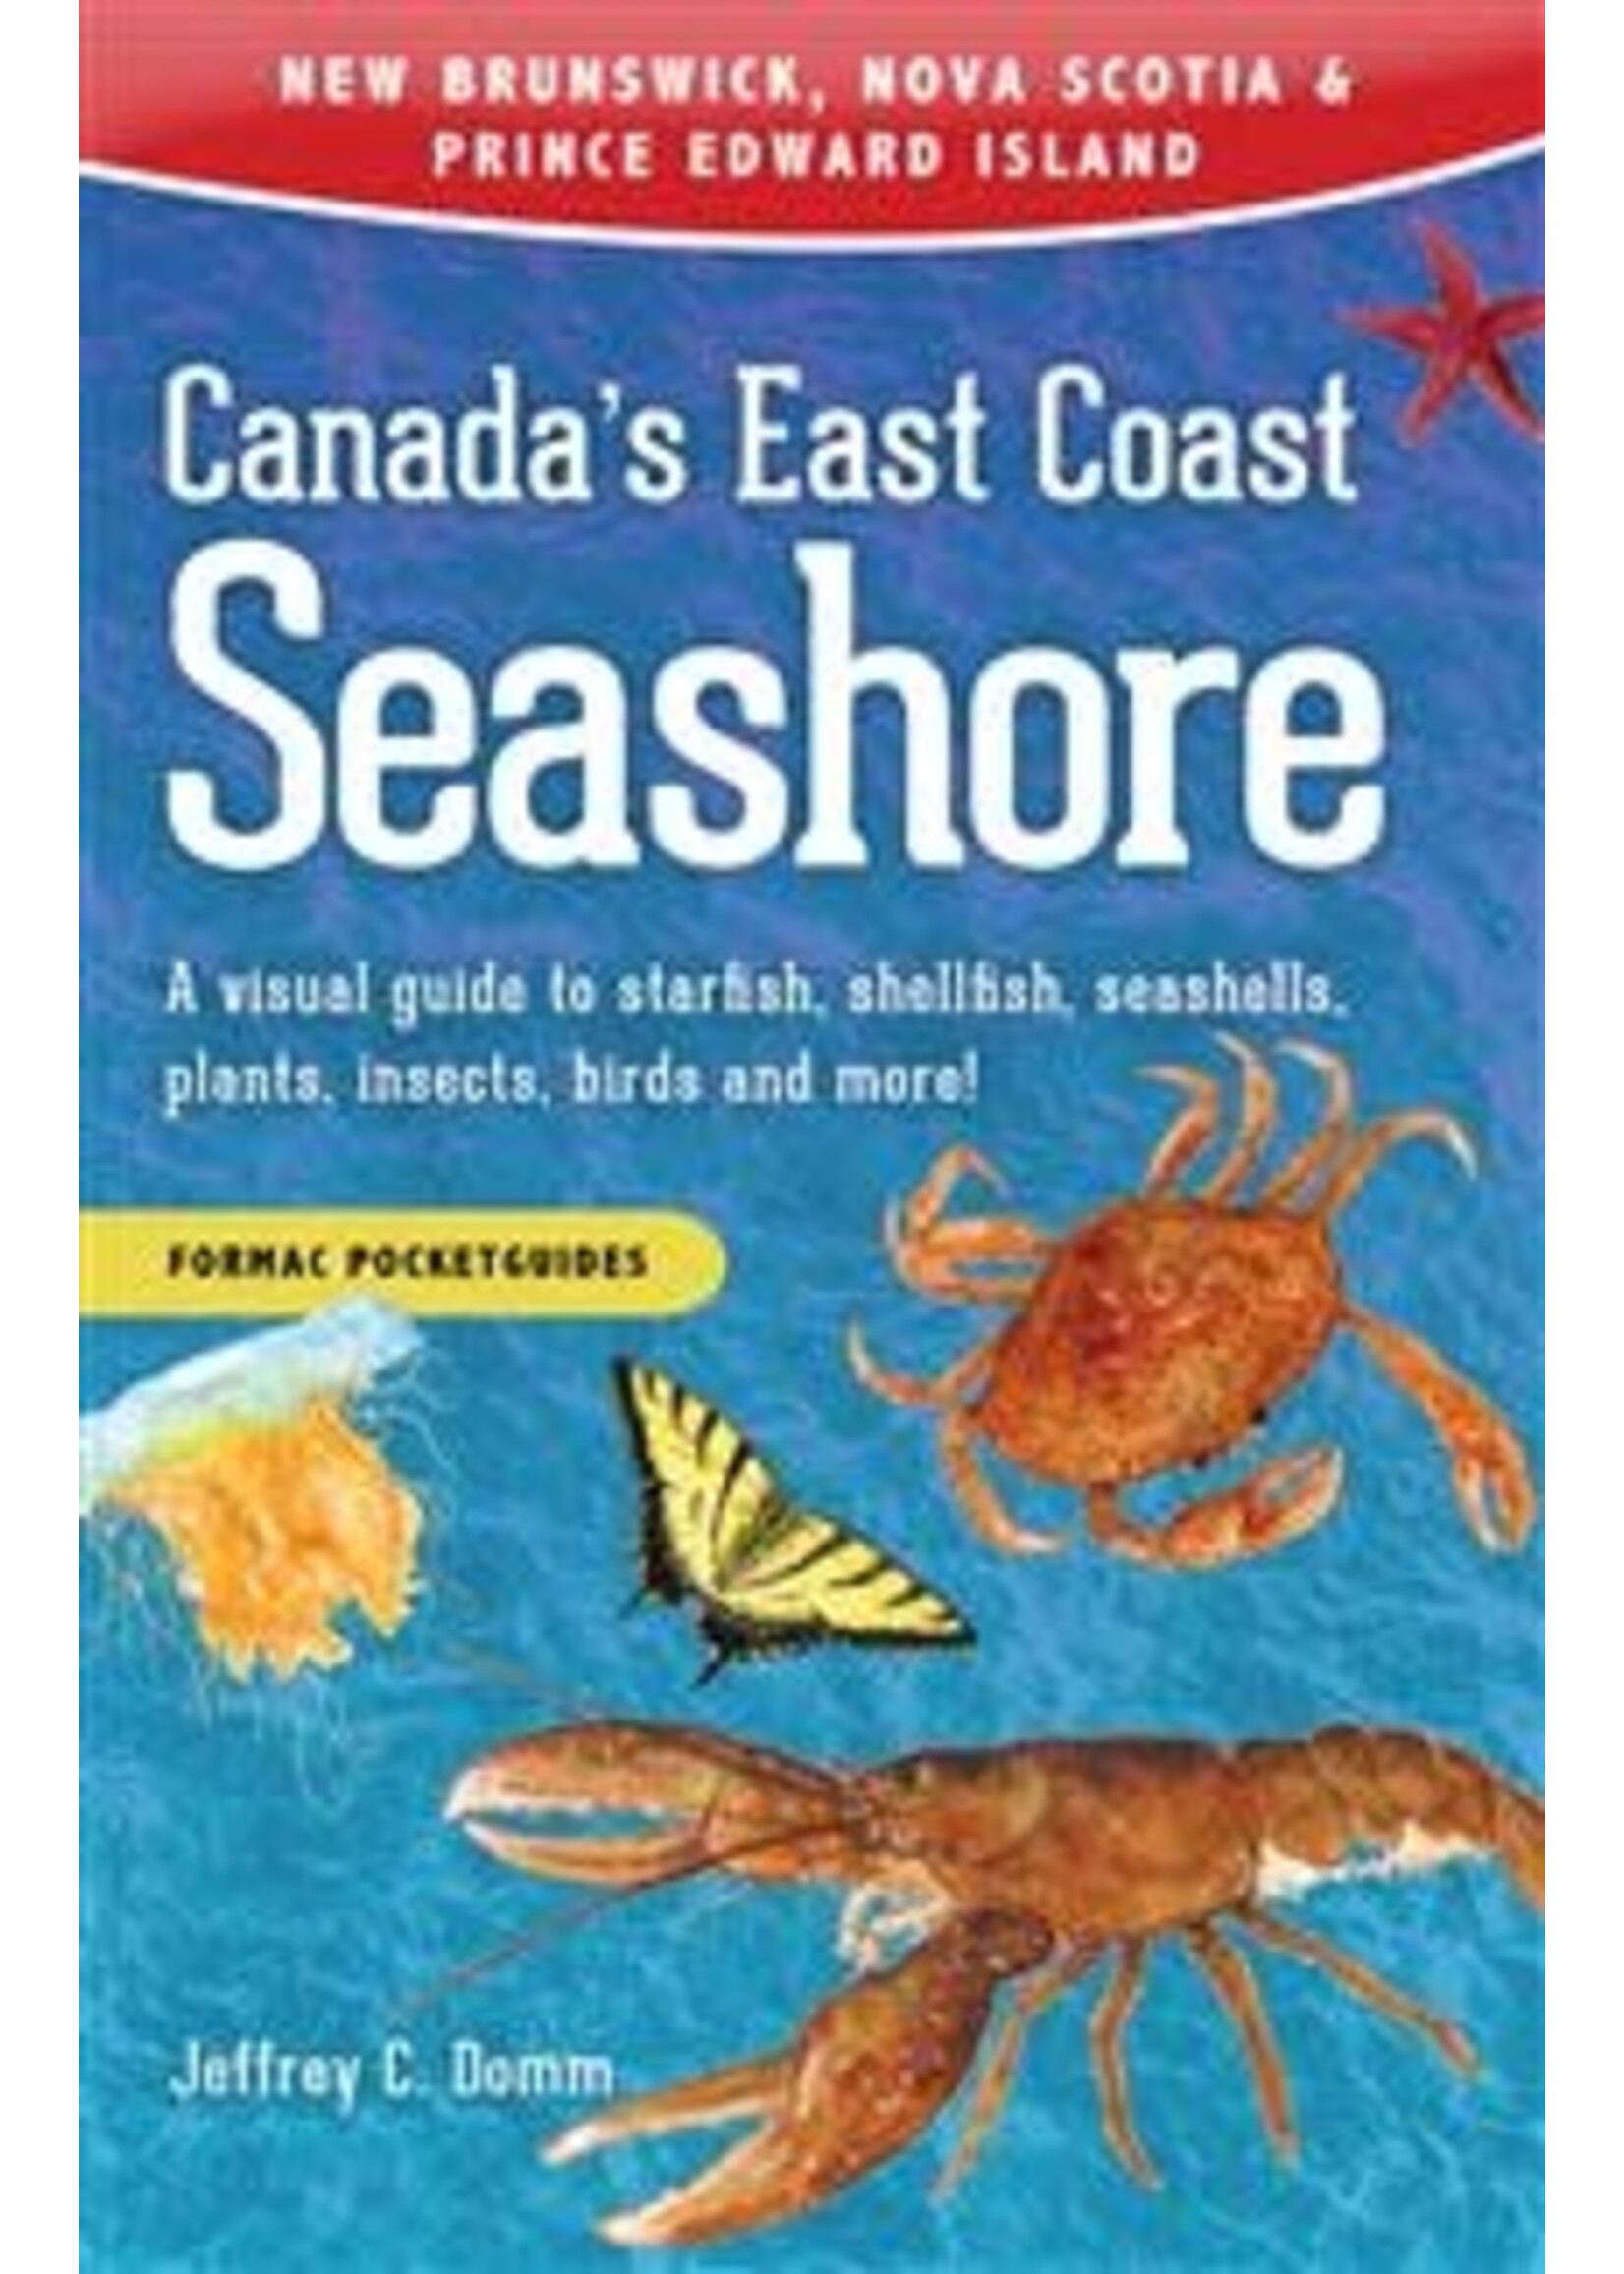 Canada's East Coast Seashore: A visual guide to starfish, shellfish, seashells, plants, insects, birds and more! by Jeffrey C. Domm